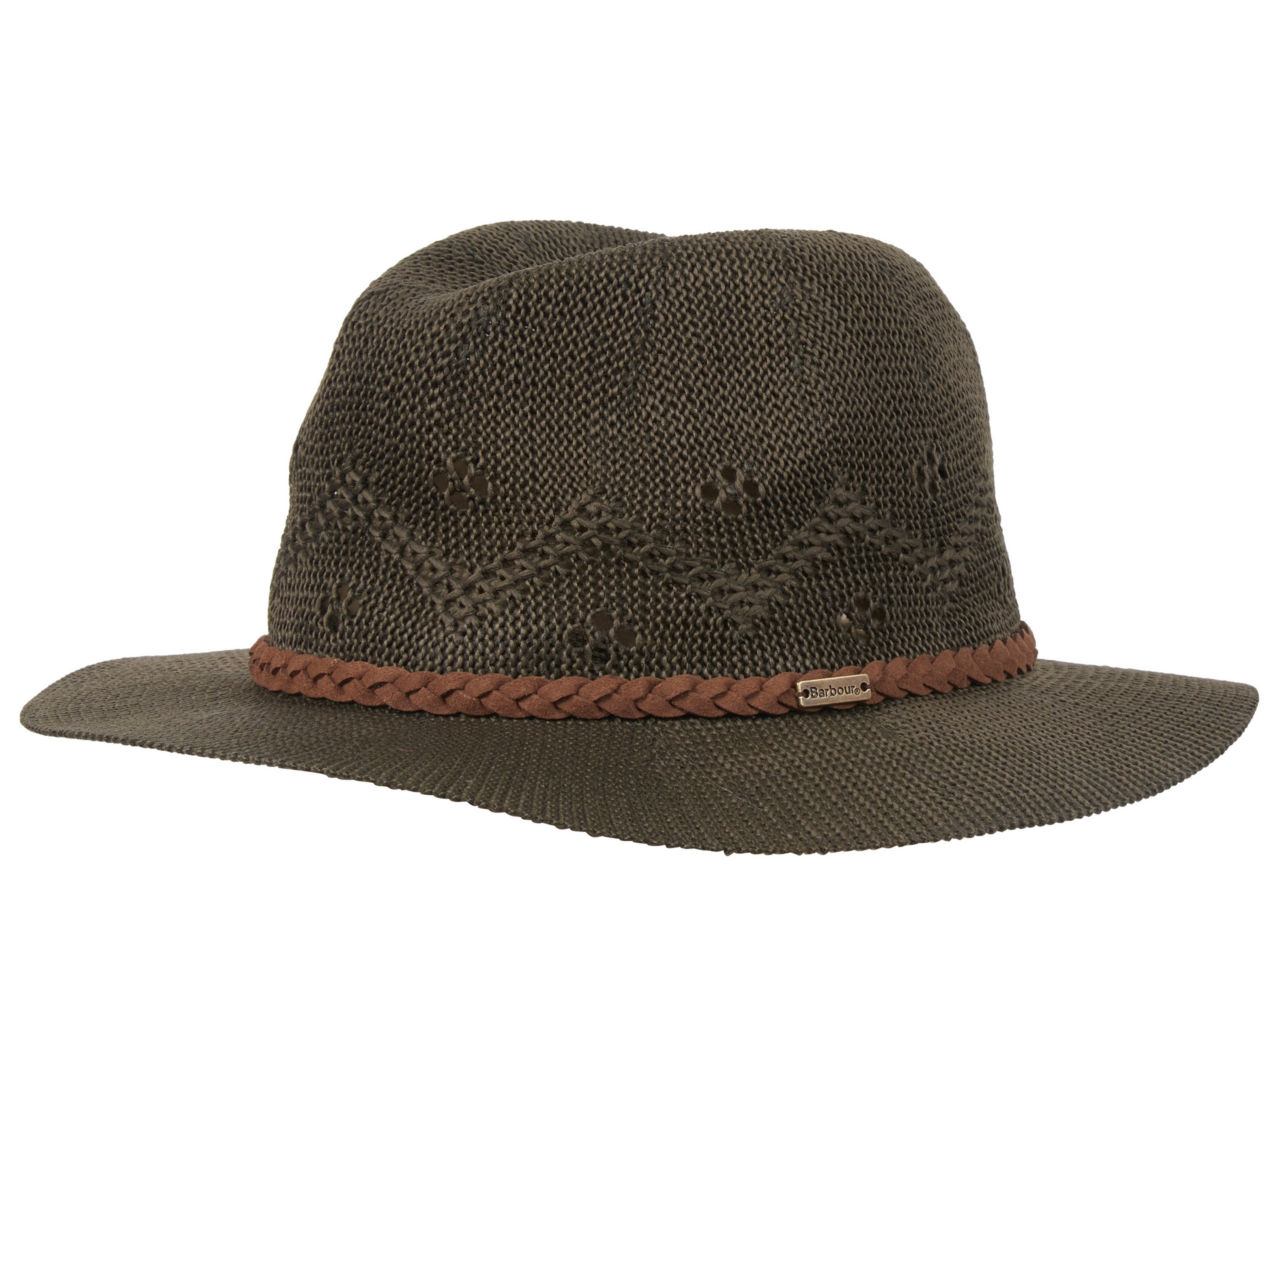 Barbour Flowerdale Trilby Hat -  image number 1